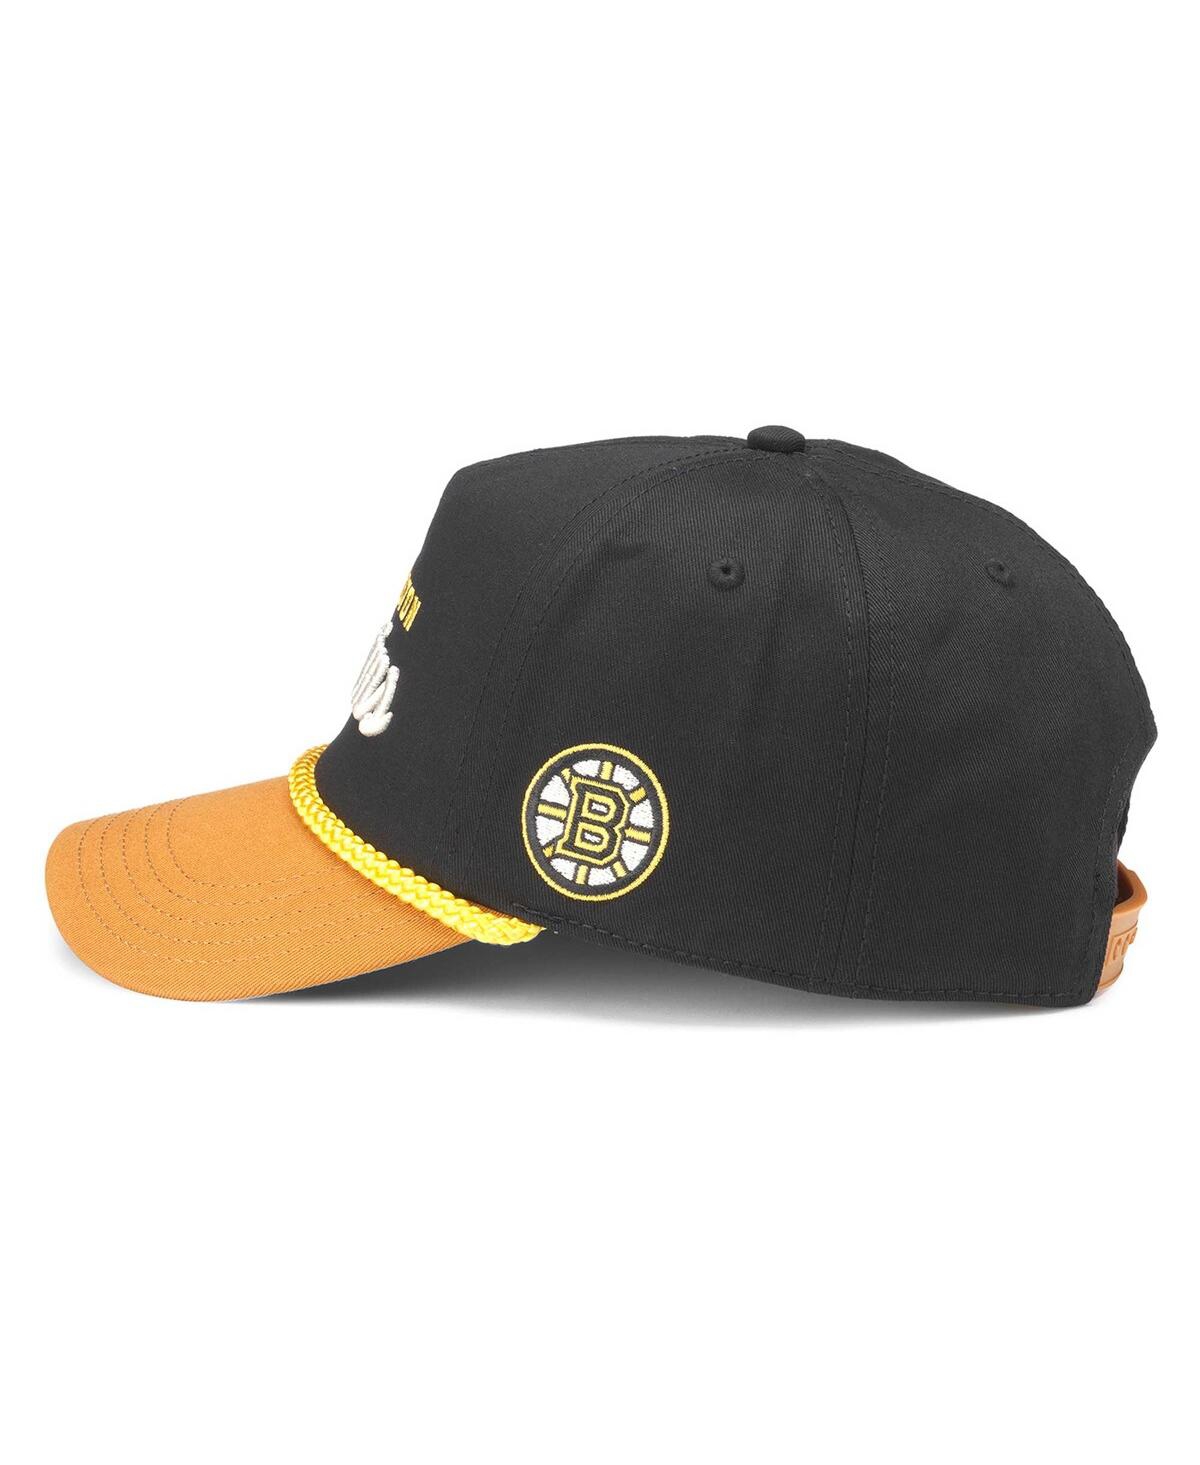 Shop American Needle Men's Black/gold Boston Bruins Roscoe Washed Twill Adjustable Hat In Black Gold